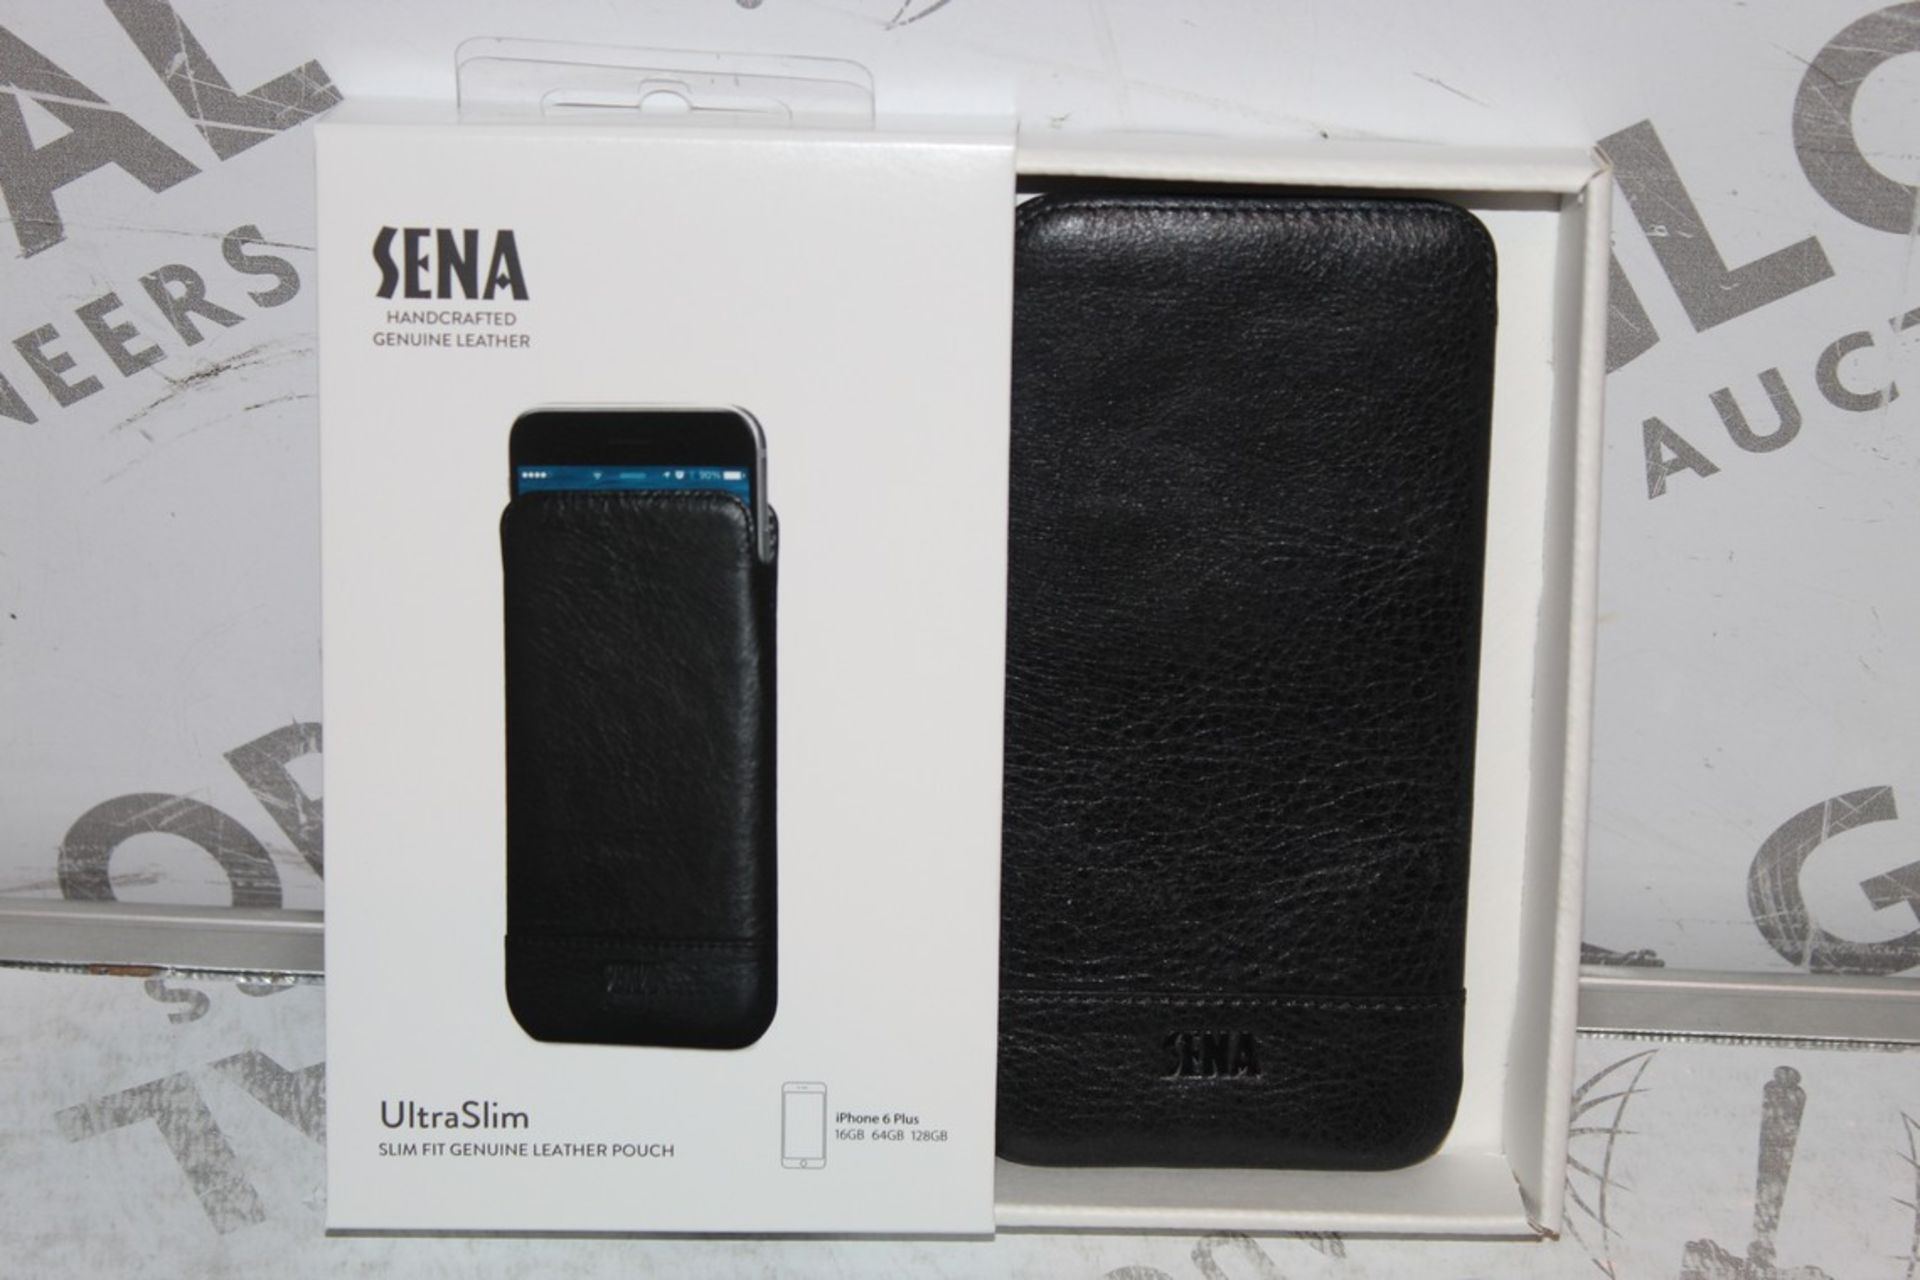 Lot to Contain 80 Boxed Brand New Sena Hand Crafted Genuine Leather Iphone 6+ Skinny Leather Pouches